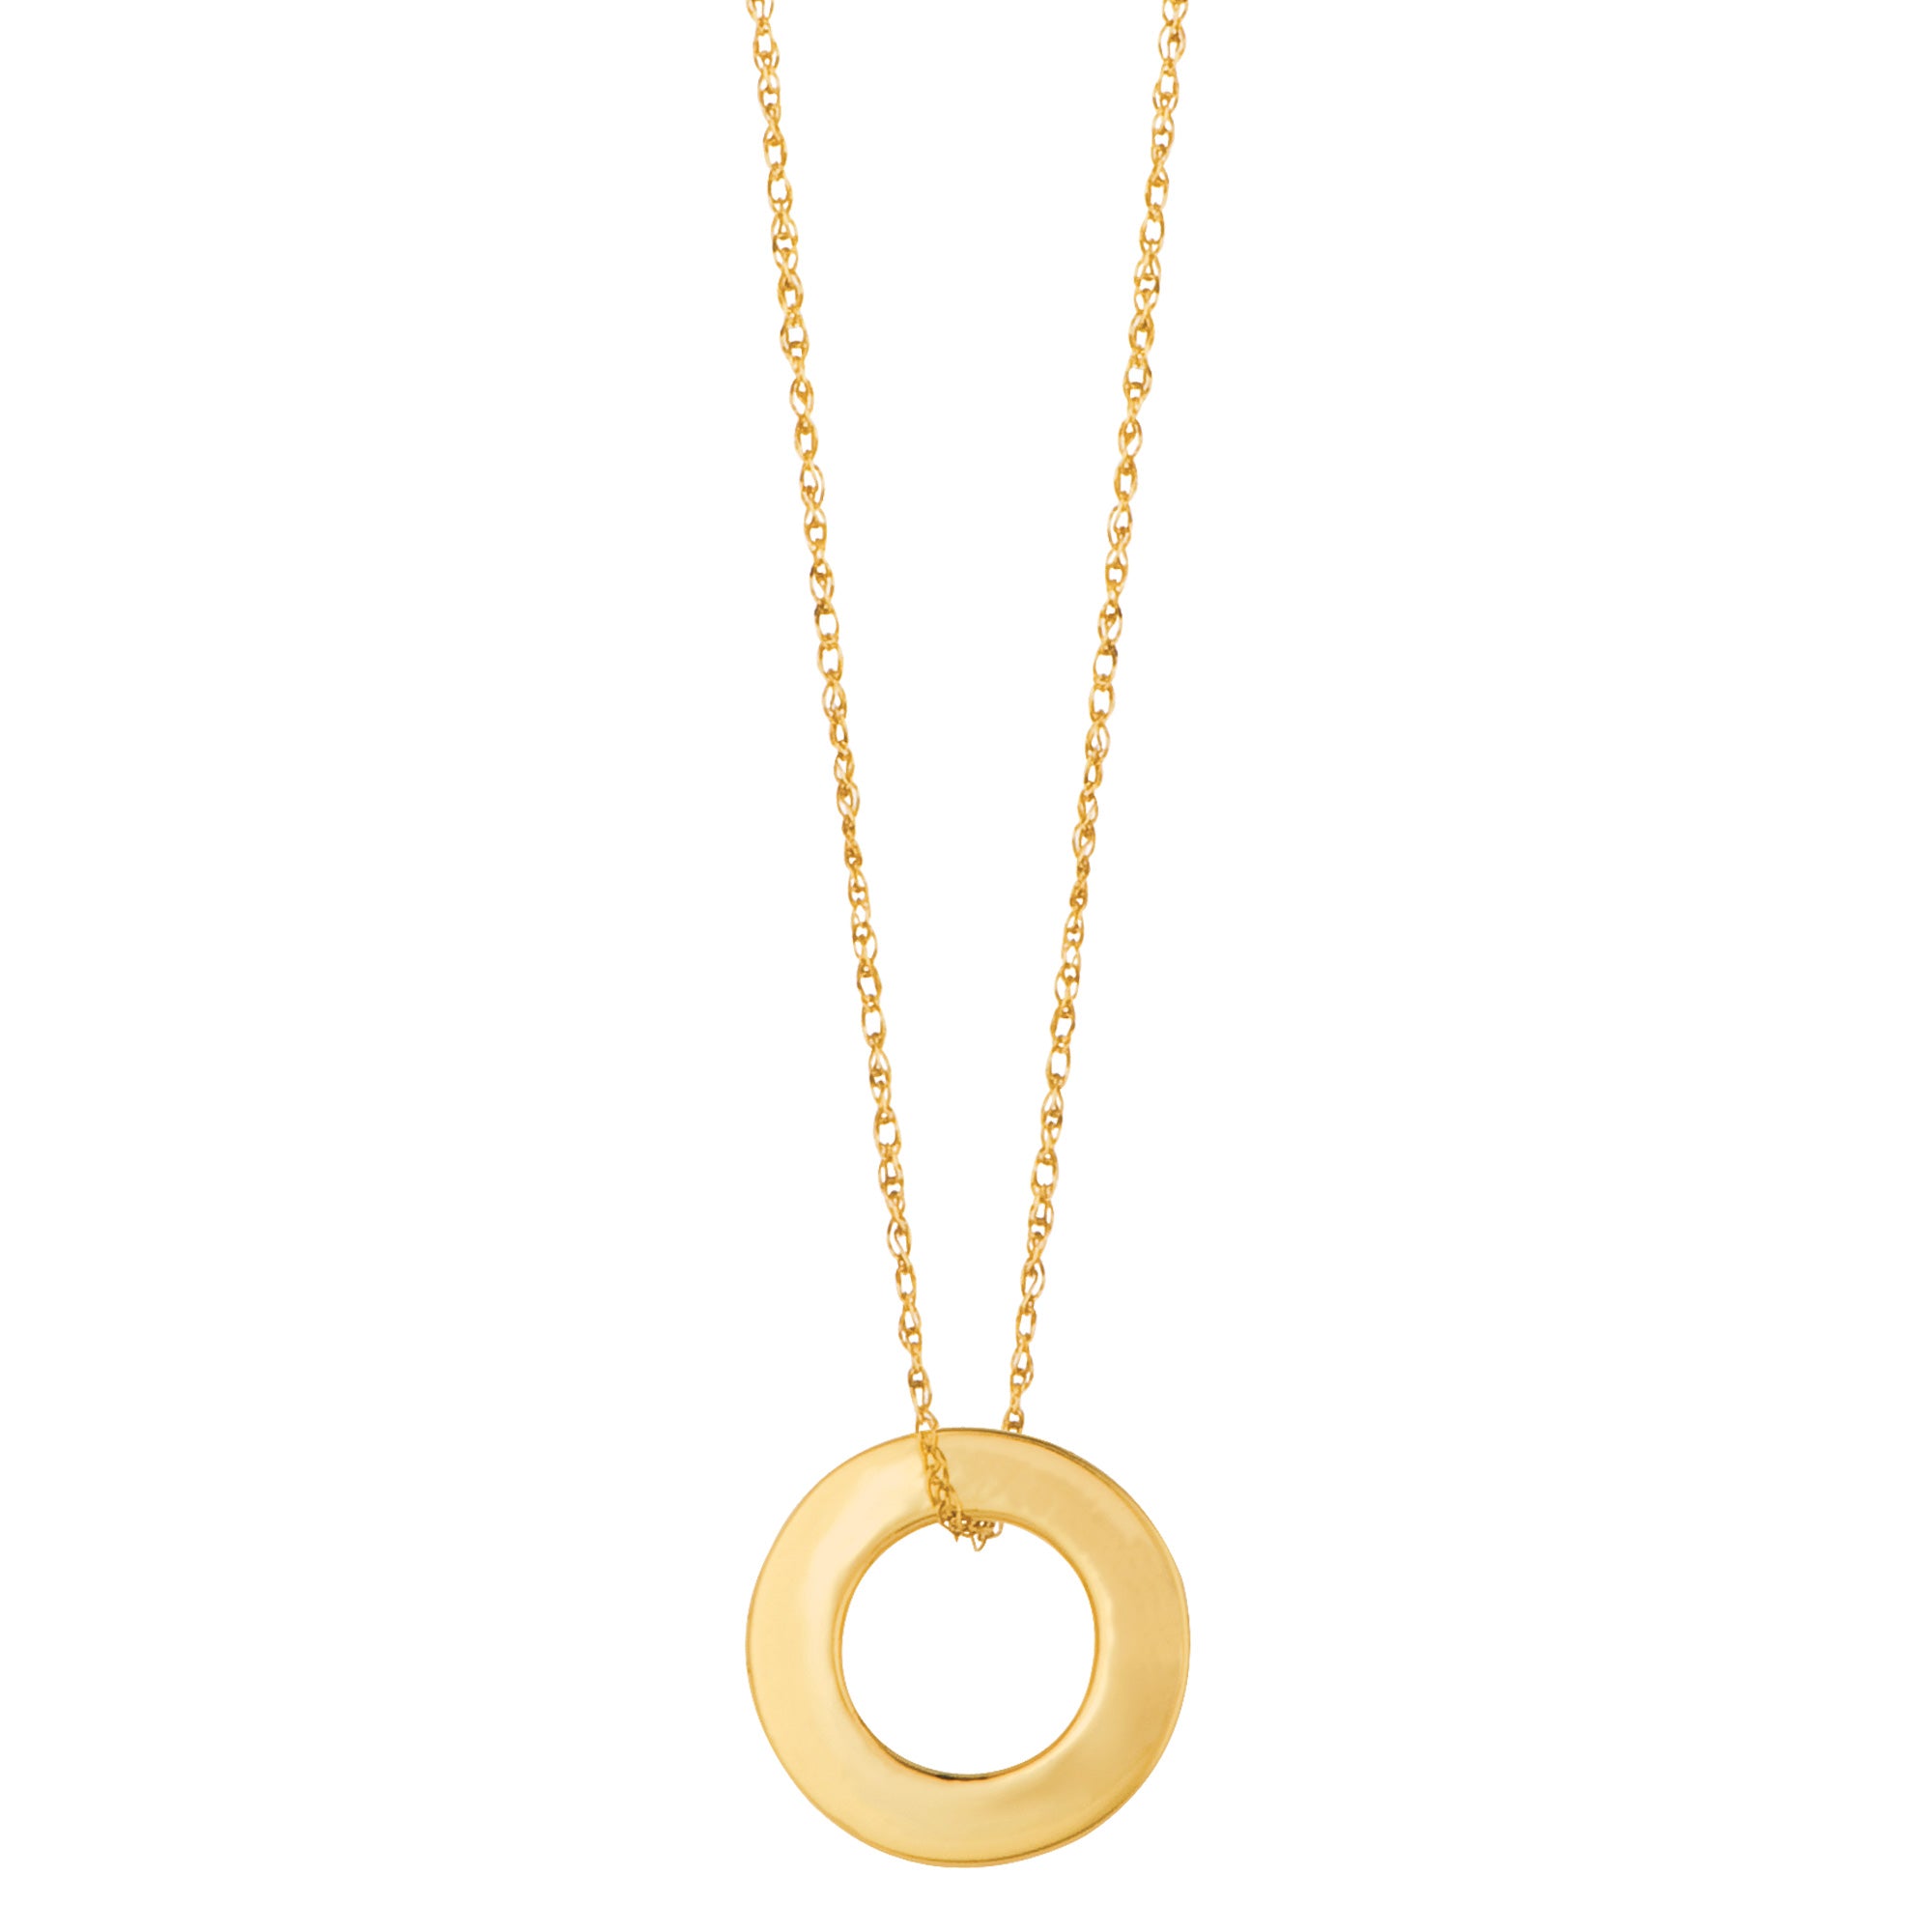 14k Yellow Gold Circle Shaped Pendant Necklace, 18" fine designer jewelry for men and women